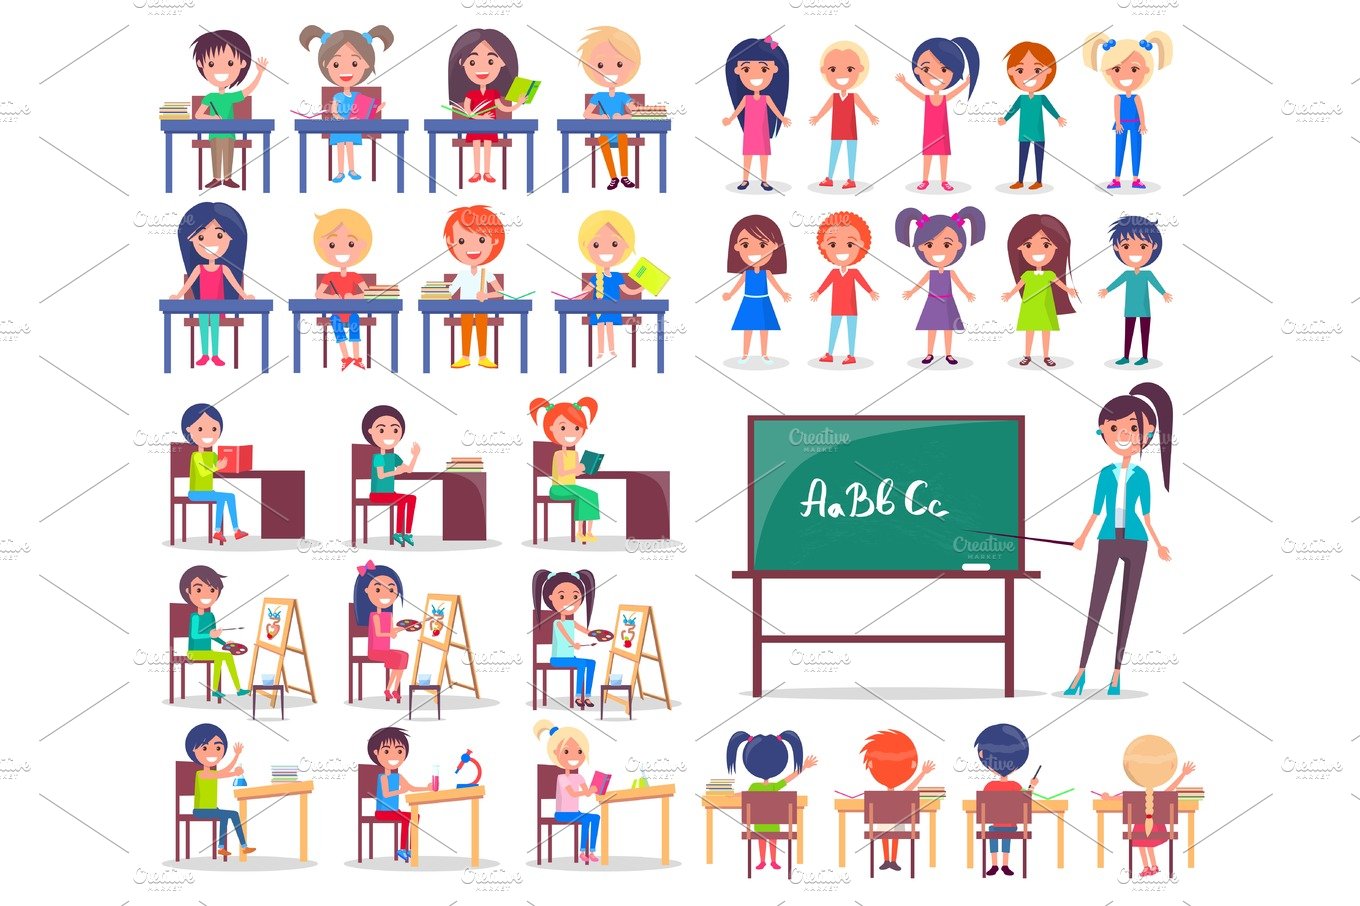 Isolated Students Sitting at Desks and Teacher cover image.